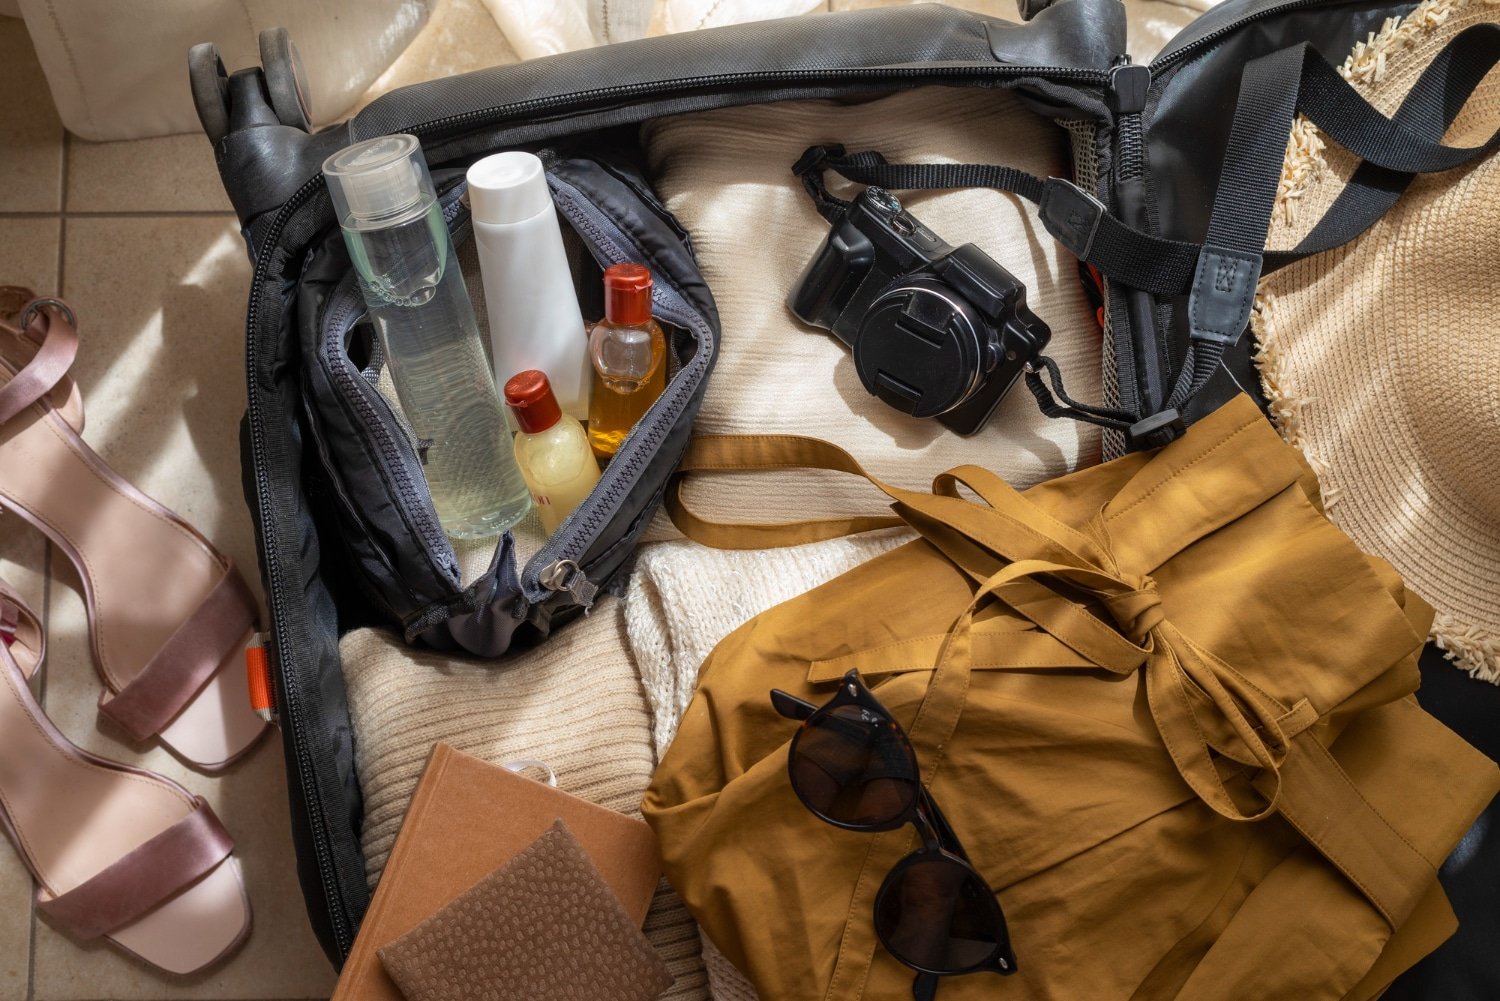 Backcountry Outdoor Gear for Every Adventure